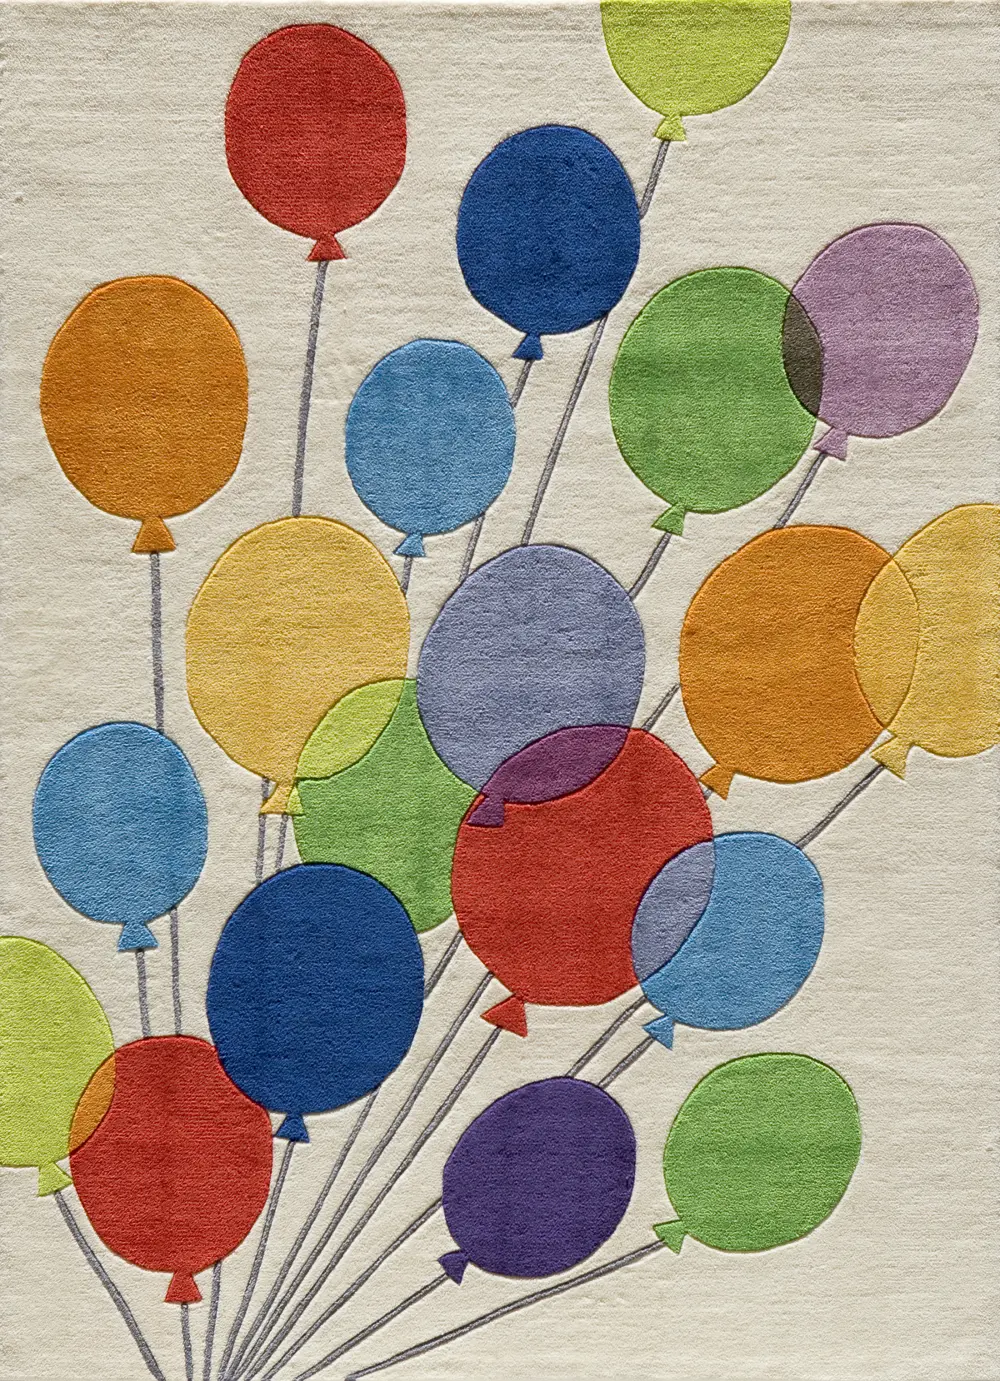 4 x 6 Small Multi-Colored Balloons Area Rug - Whimsy-1